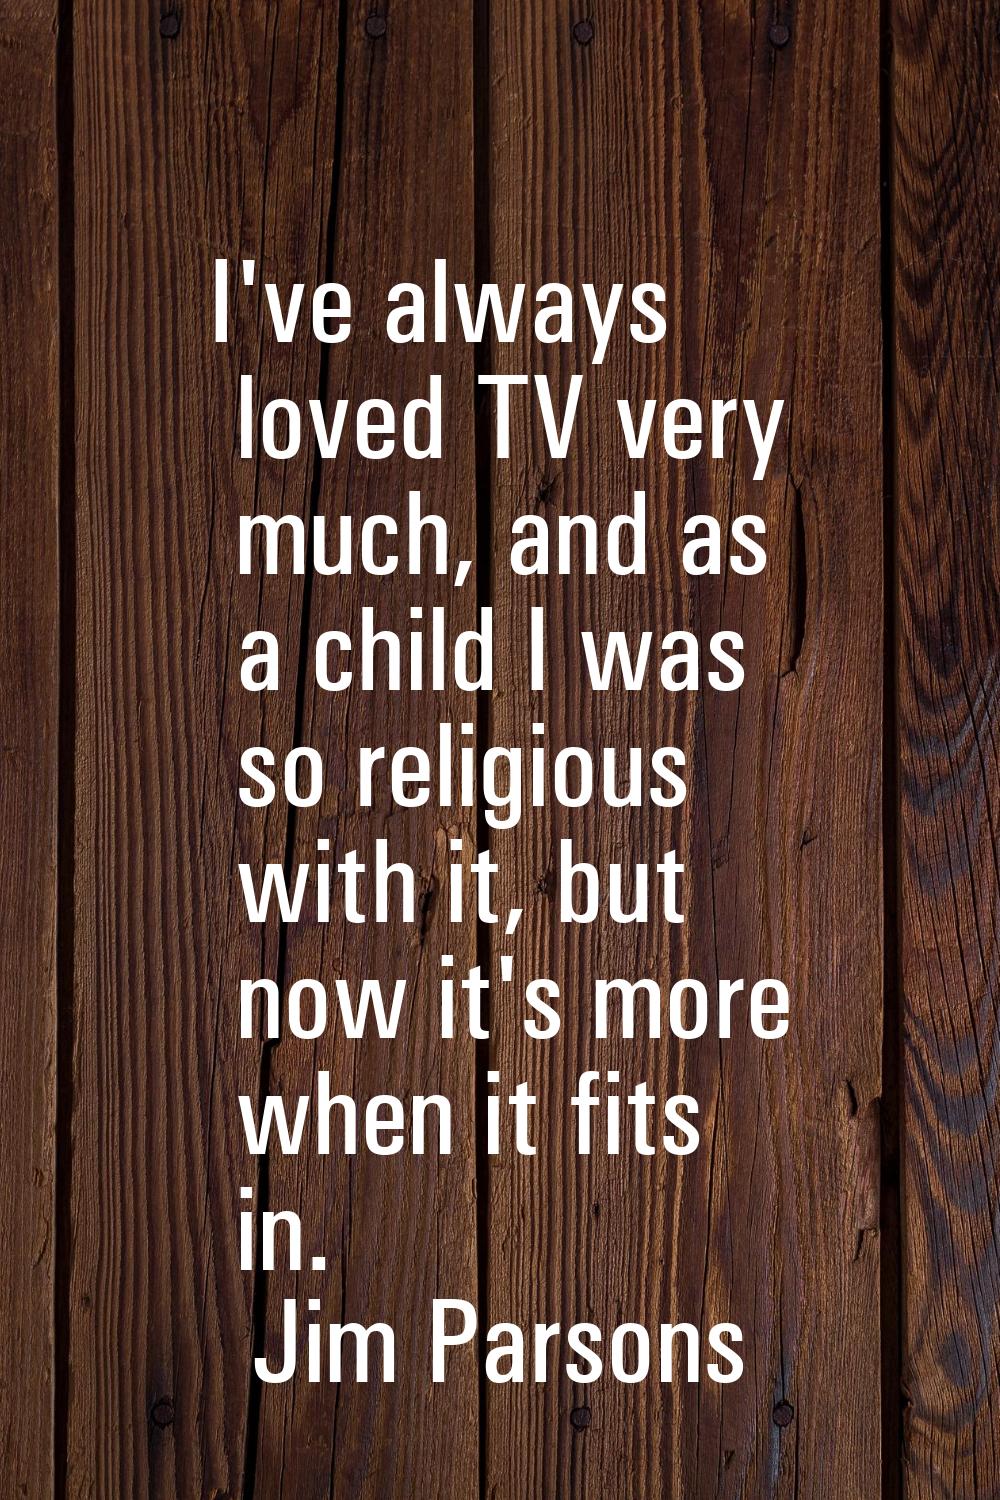 I've always loved TV very much, and as a child I was so religious with it, but now it's more when i